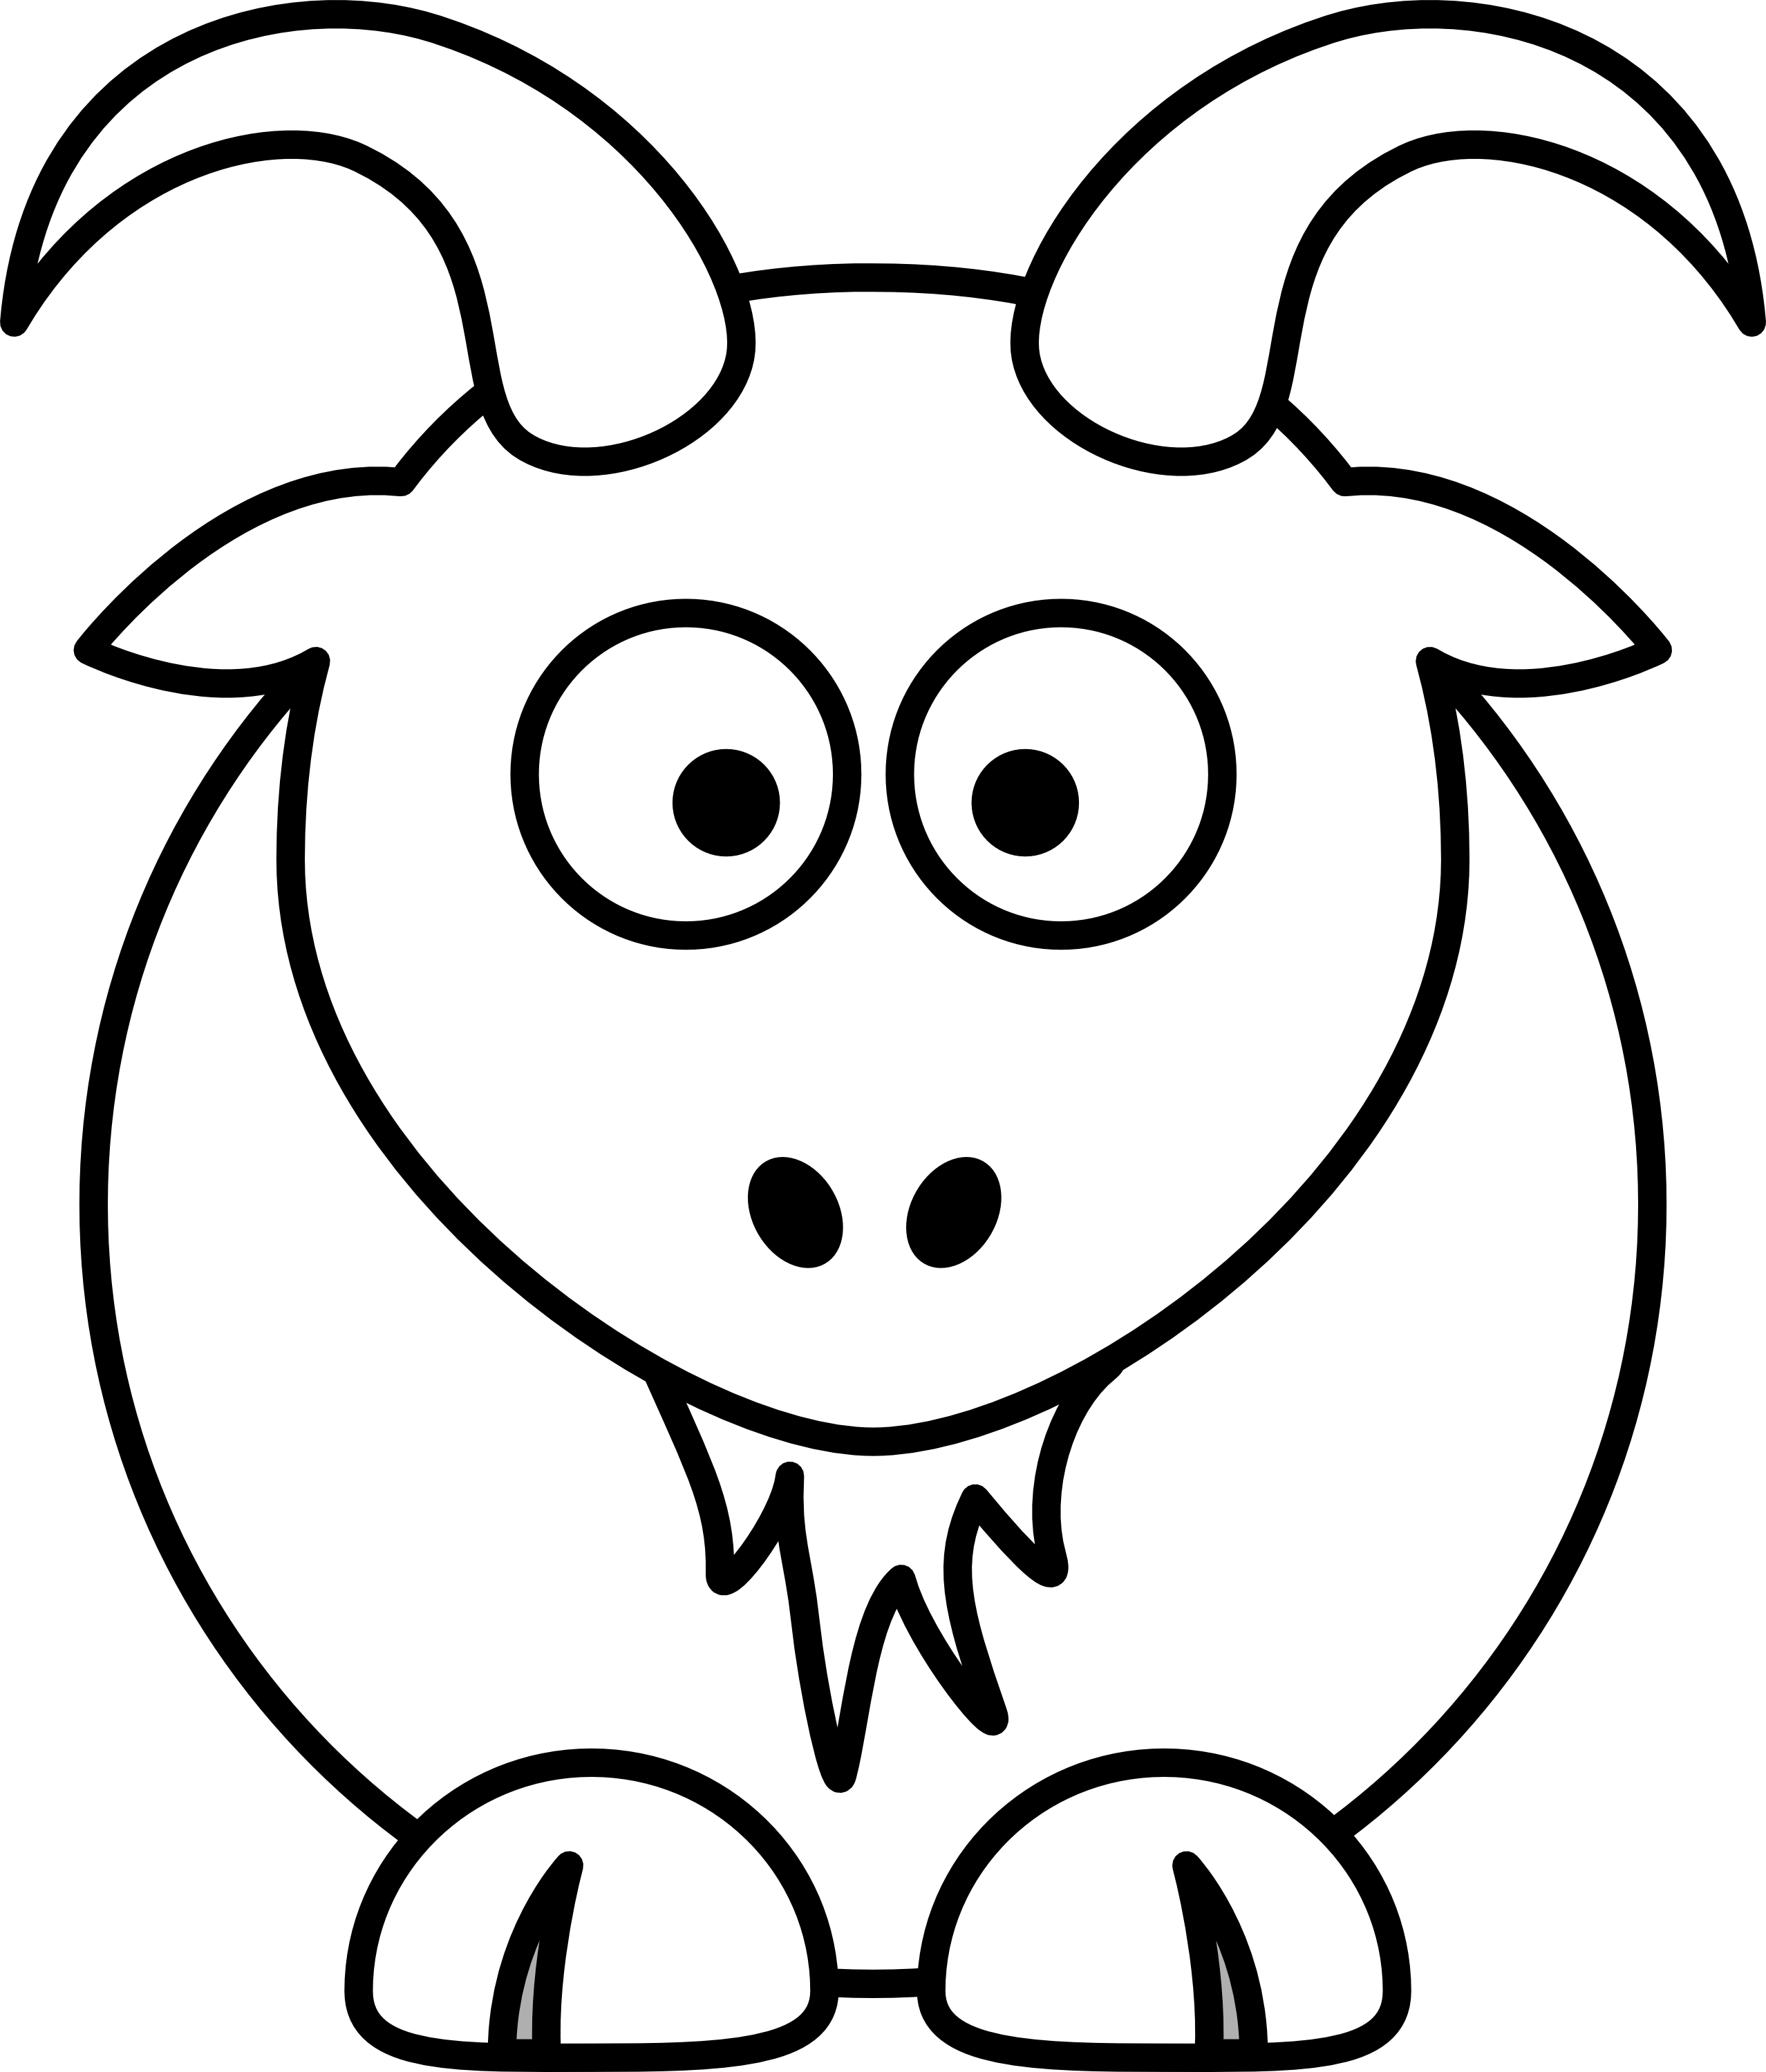 Straight Face Clipart Black And White Clipart Panda Free Clipart